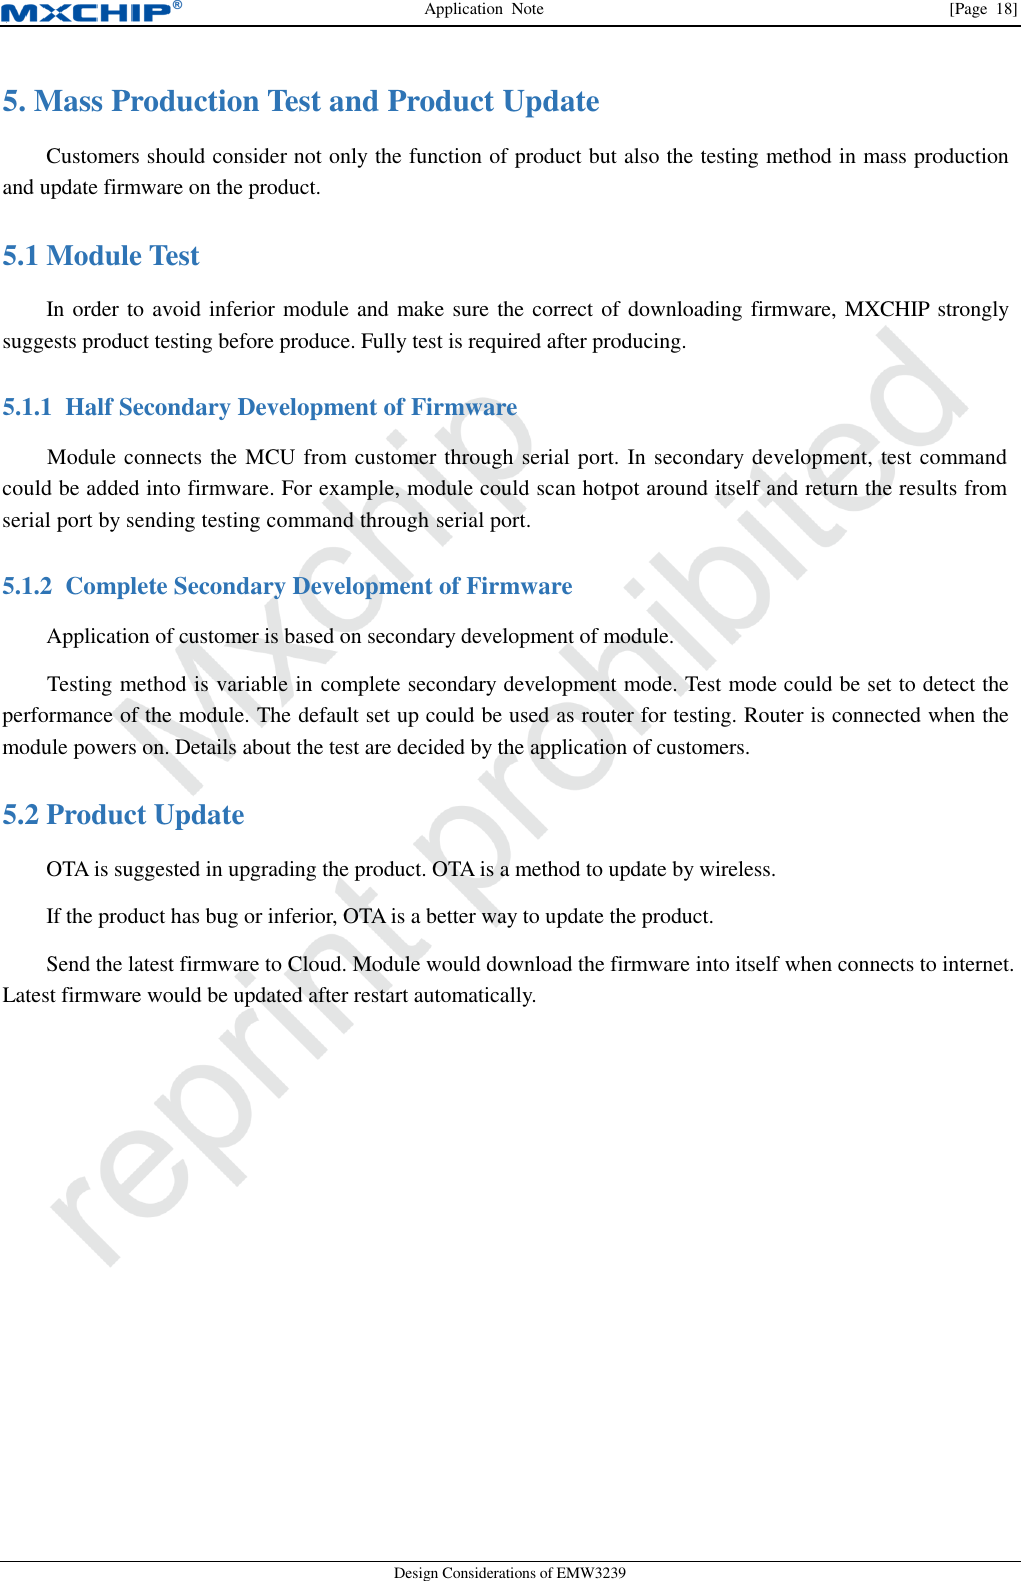 Application  Note                [Page  18] Design Considerations of EMW3239 5. Mass Production Test and Product Update Customers should consider not only the function of product but also the testing method in mass production and update firmware on the product.  Module Test 5.1In order to avoid inferior module and make sure the correct of downloading firmware, MXCHIP strongly suggests product testing before produce. Fully test is required after producing. 5.1.1 Half Secondary Development of Firmware Module connects the MCU from customer through serial port. In secondary development, test command could be added into firmware. For example, module could scan hotpot around itself and return the results from serial port by sending testing command through serial port. 5.1.2 Complete Secondary Development of Firmware Application of customer is based on secondary development of module. Testing method is variable in complete secondary development mode. Test mode could be set to detect the performance of the module. The default set up could be used as router for testing. Router is connected when the module powers on. Details about the test are decided by the application of customers.    Product Update 5.2OTA is suggested in upgrading the product. OTA is a method to update by wireless. If the product has bug or inferior, OTA is a better way to update the product. Send the latest firmware to Cloud. Module would download the firmware into itself when connects to internet. Latest firmware would be updated after restart automatically.     